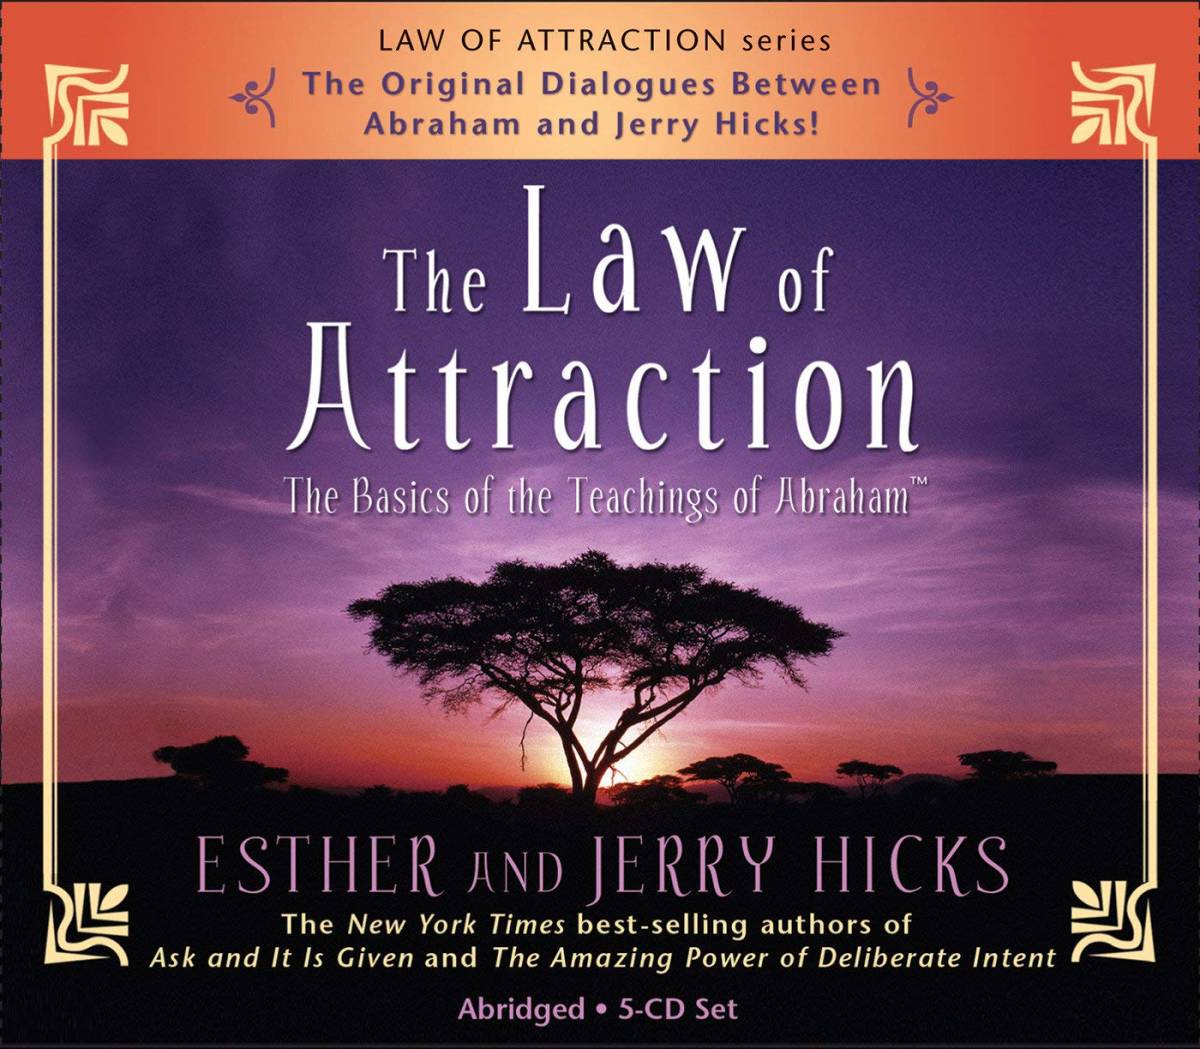 The Law of Attraction: The Basics of the Teachings of Abraham Esther Hicks (著), Jerry Hicks (著) 輸入盤CD_画像1